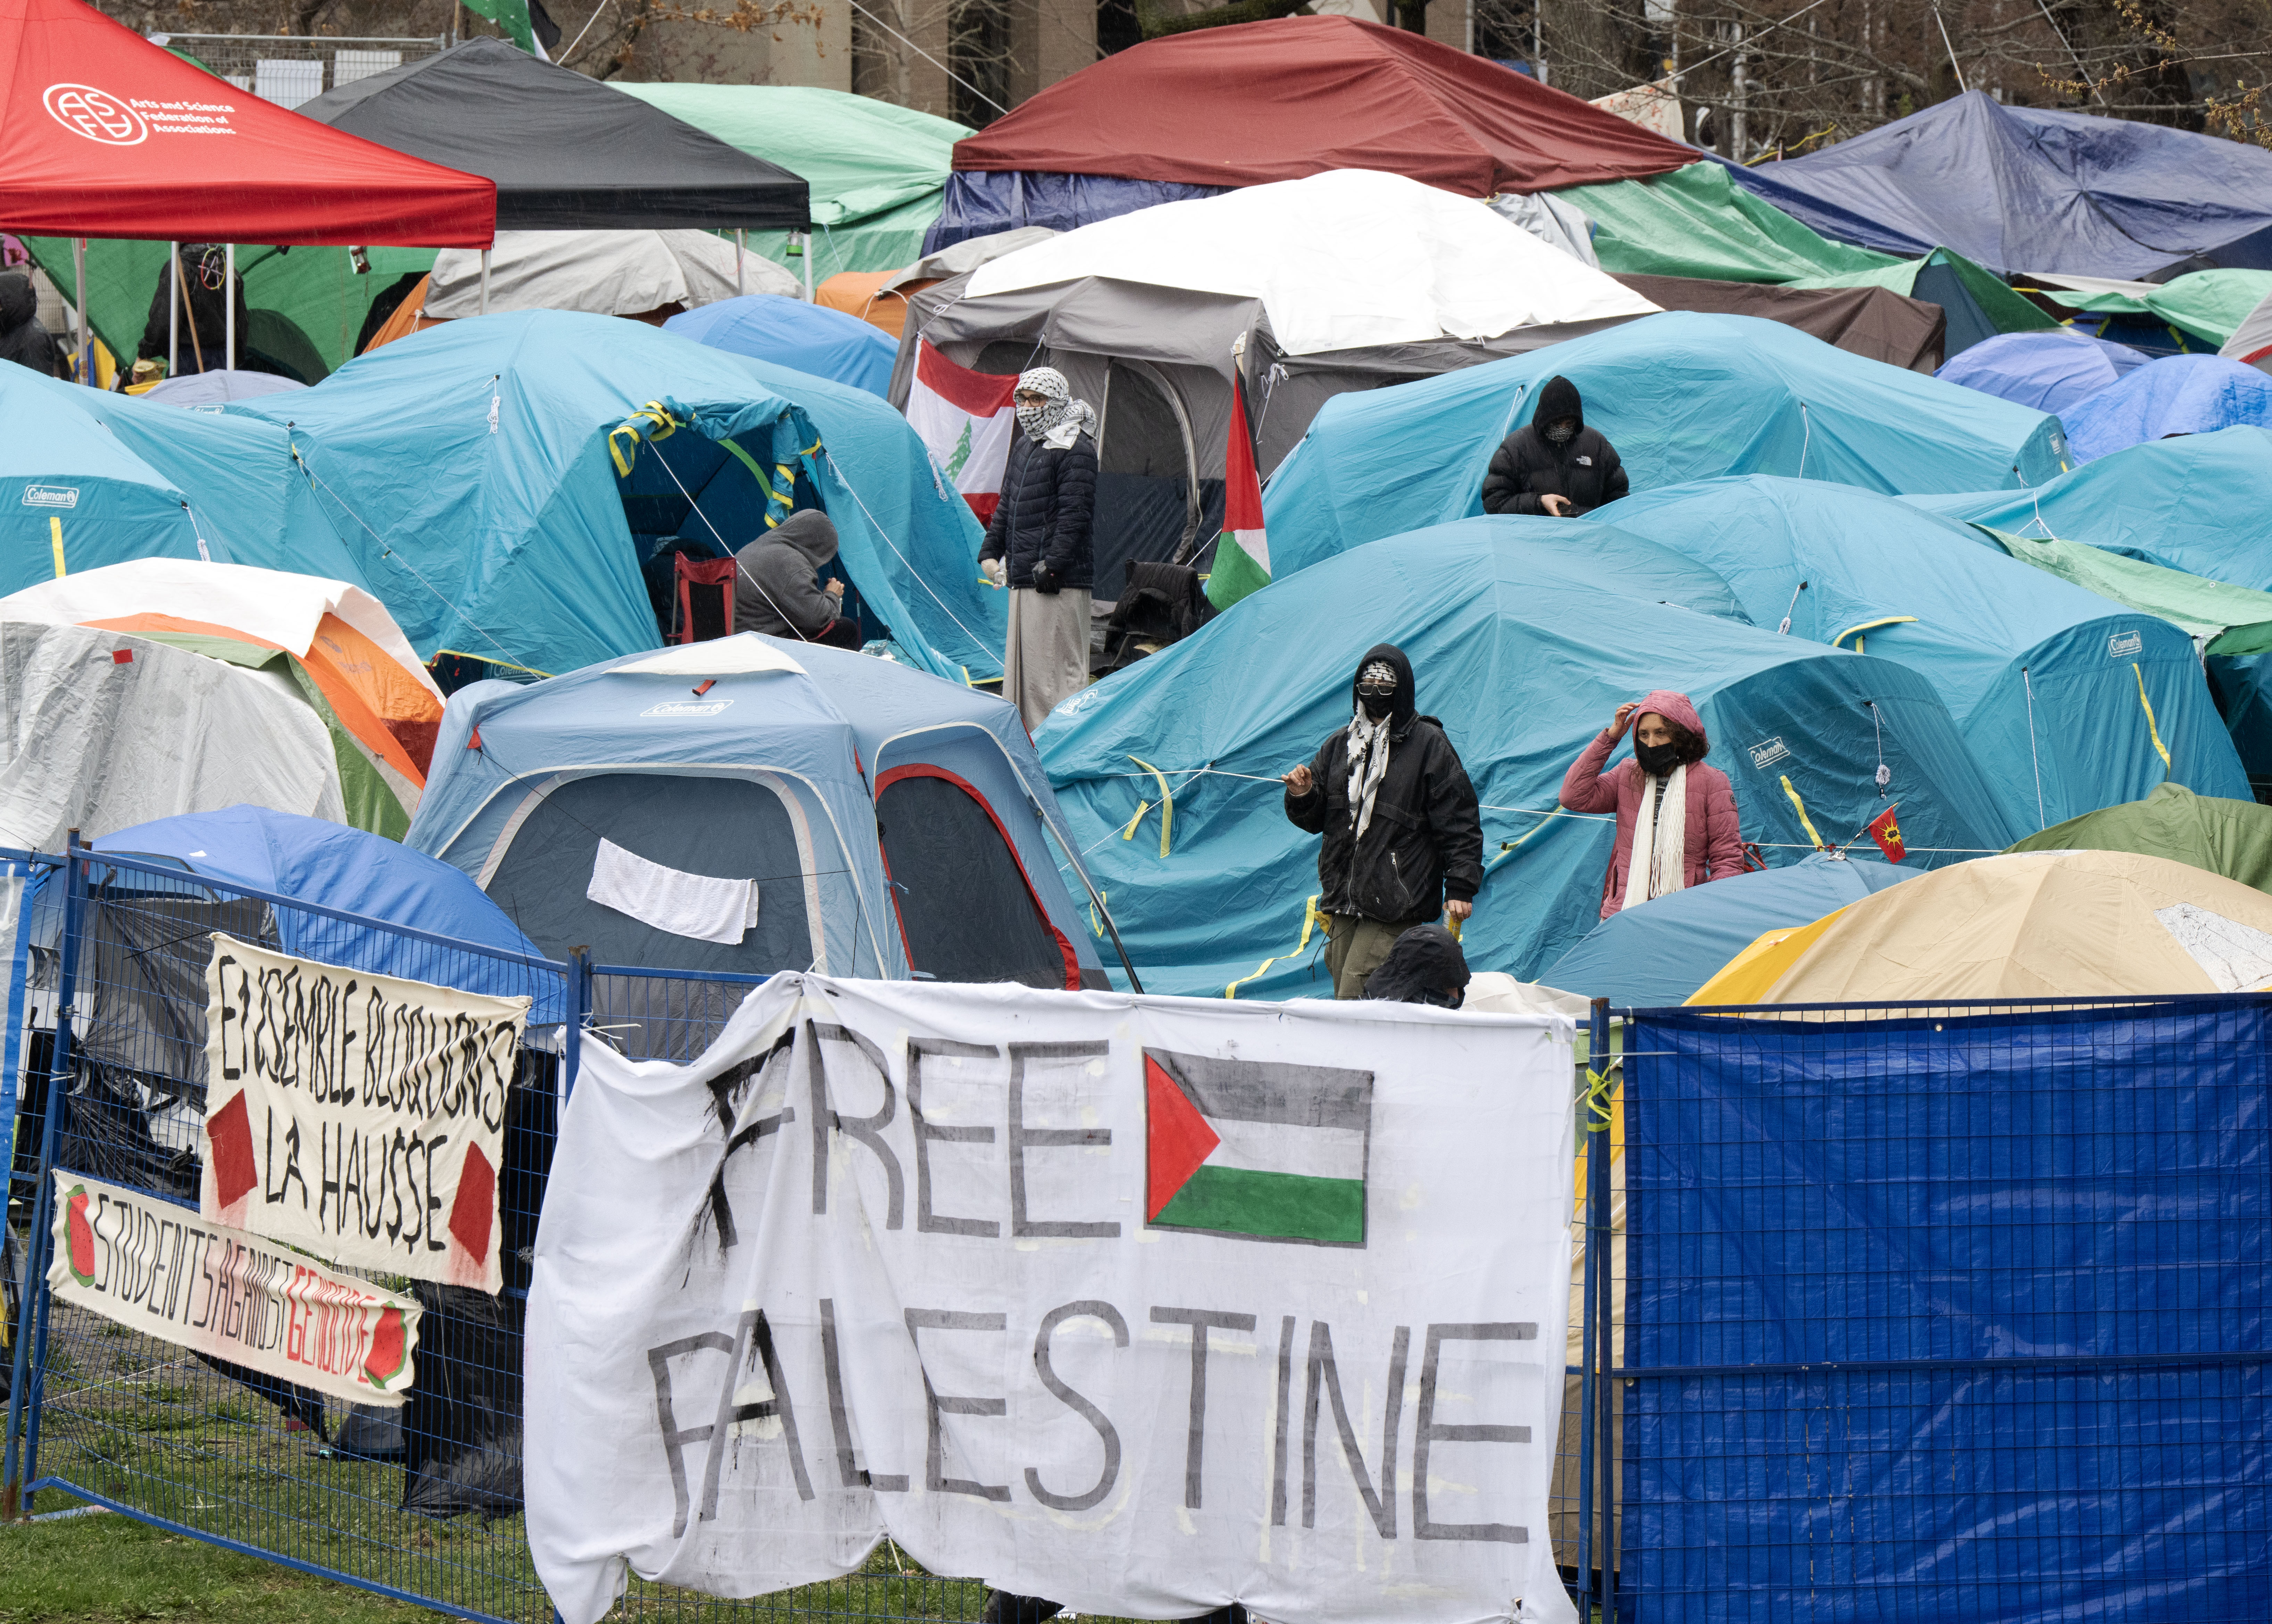 Pro-Palestinian encampment enters 5th day at McGill with court ruling
expected